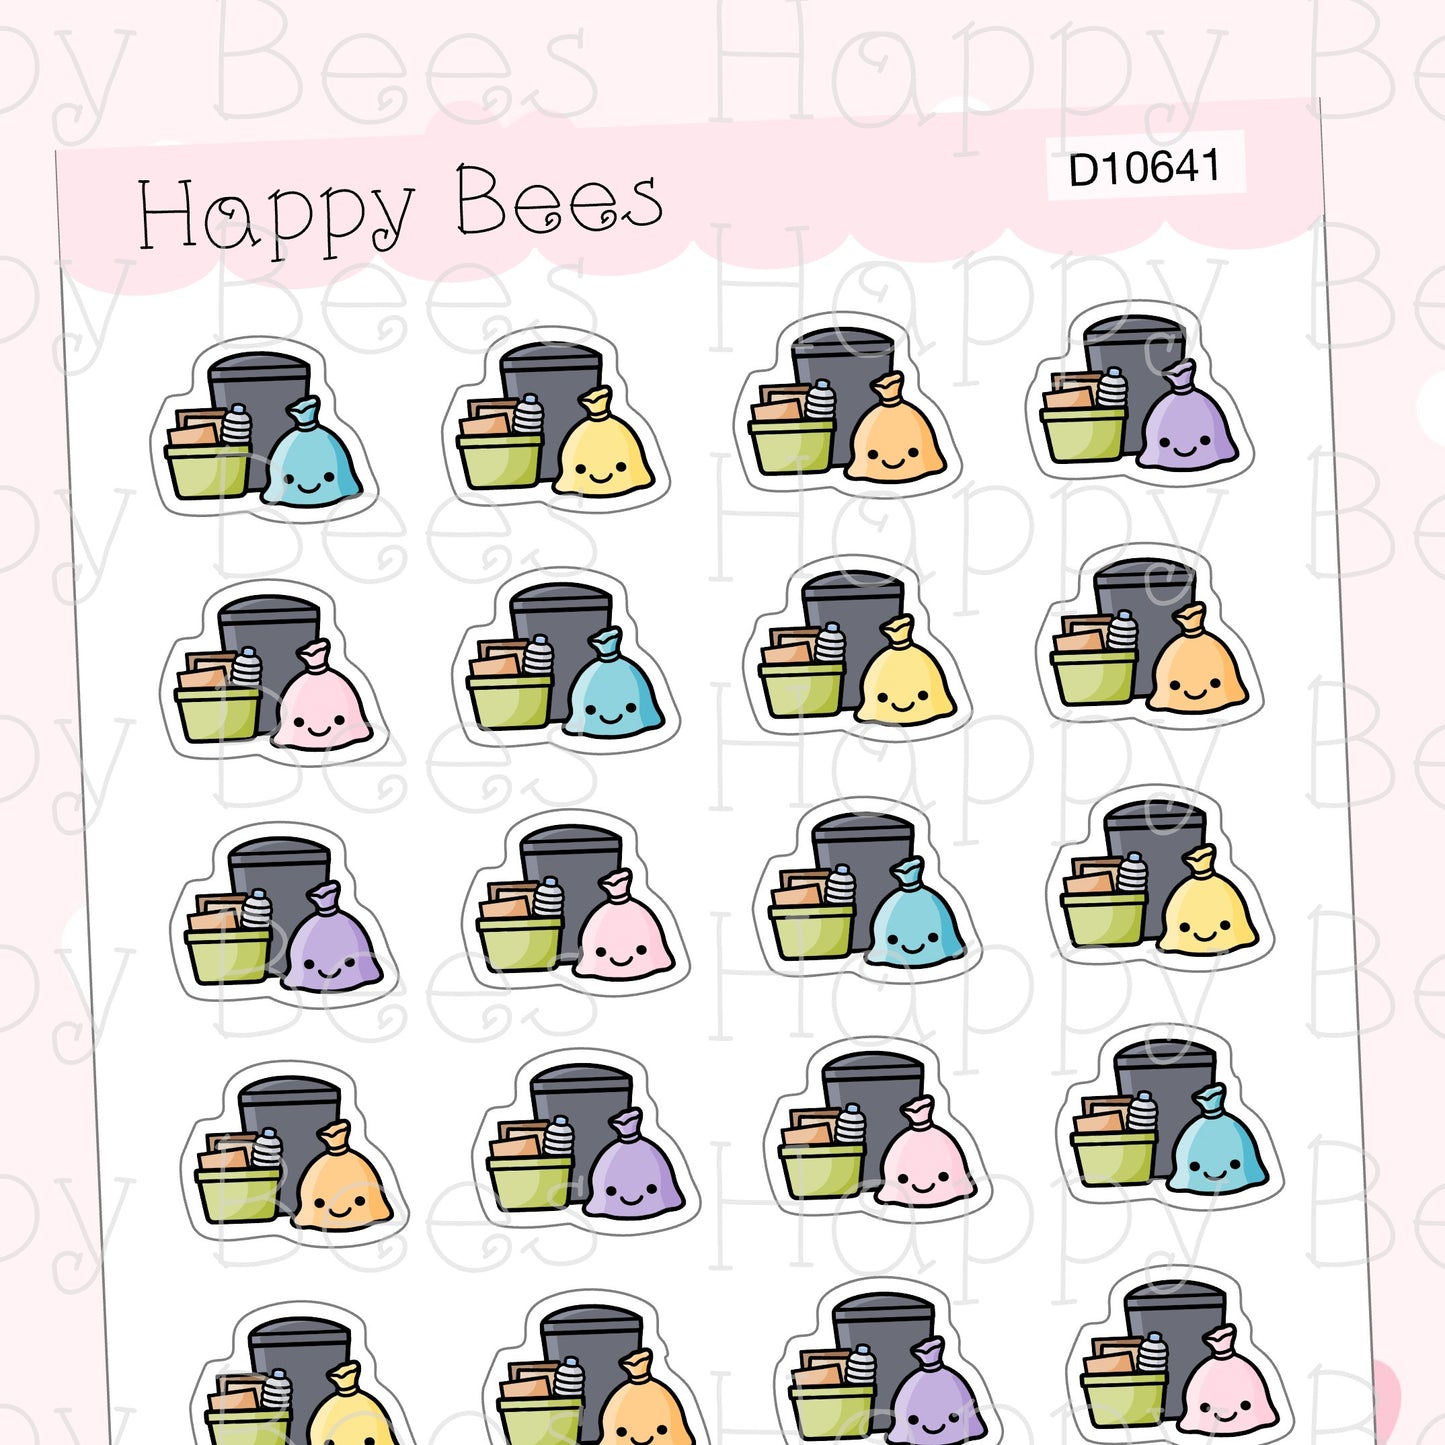 Garbage Day Doodles - Cute Chores Household Planner Stickers D10641